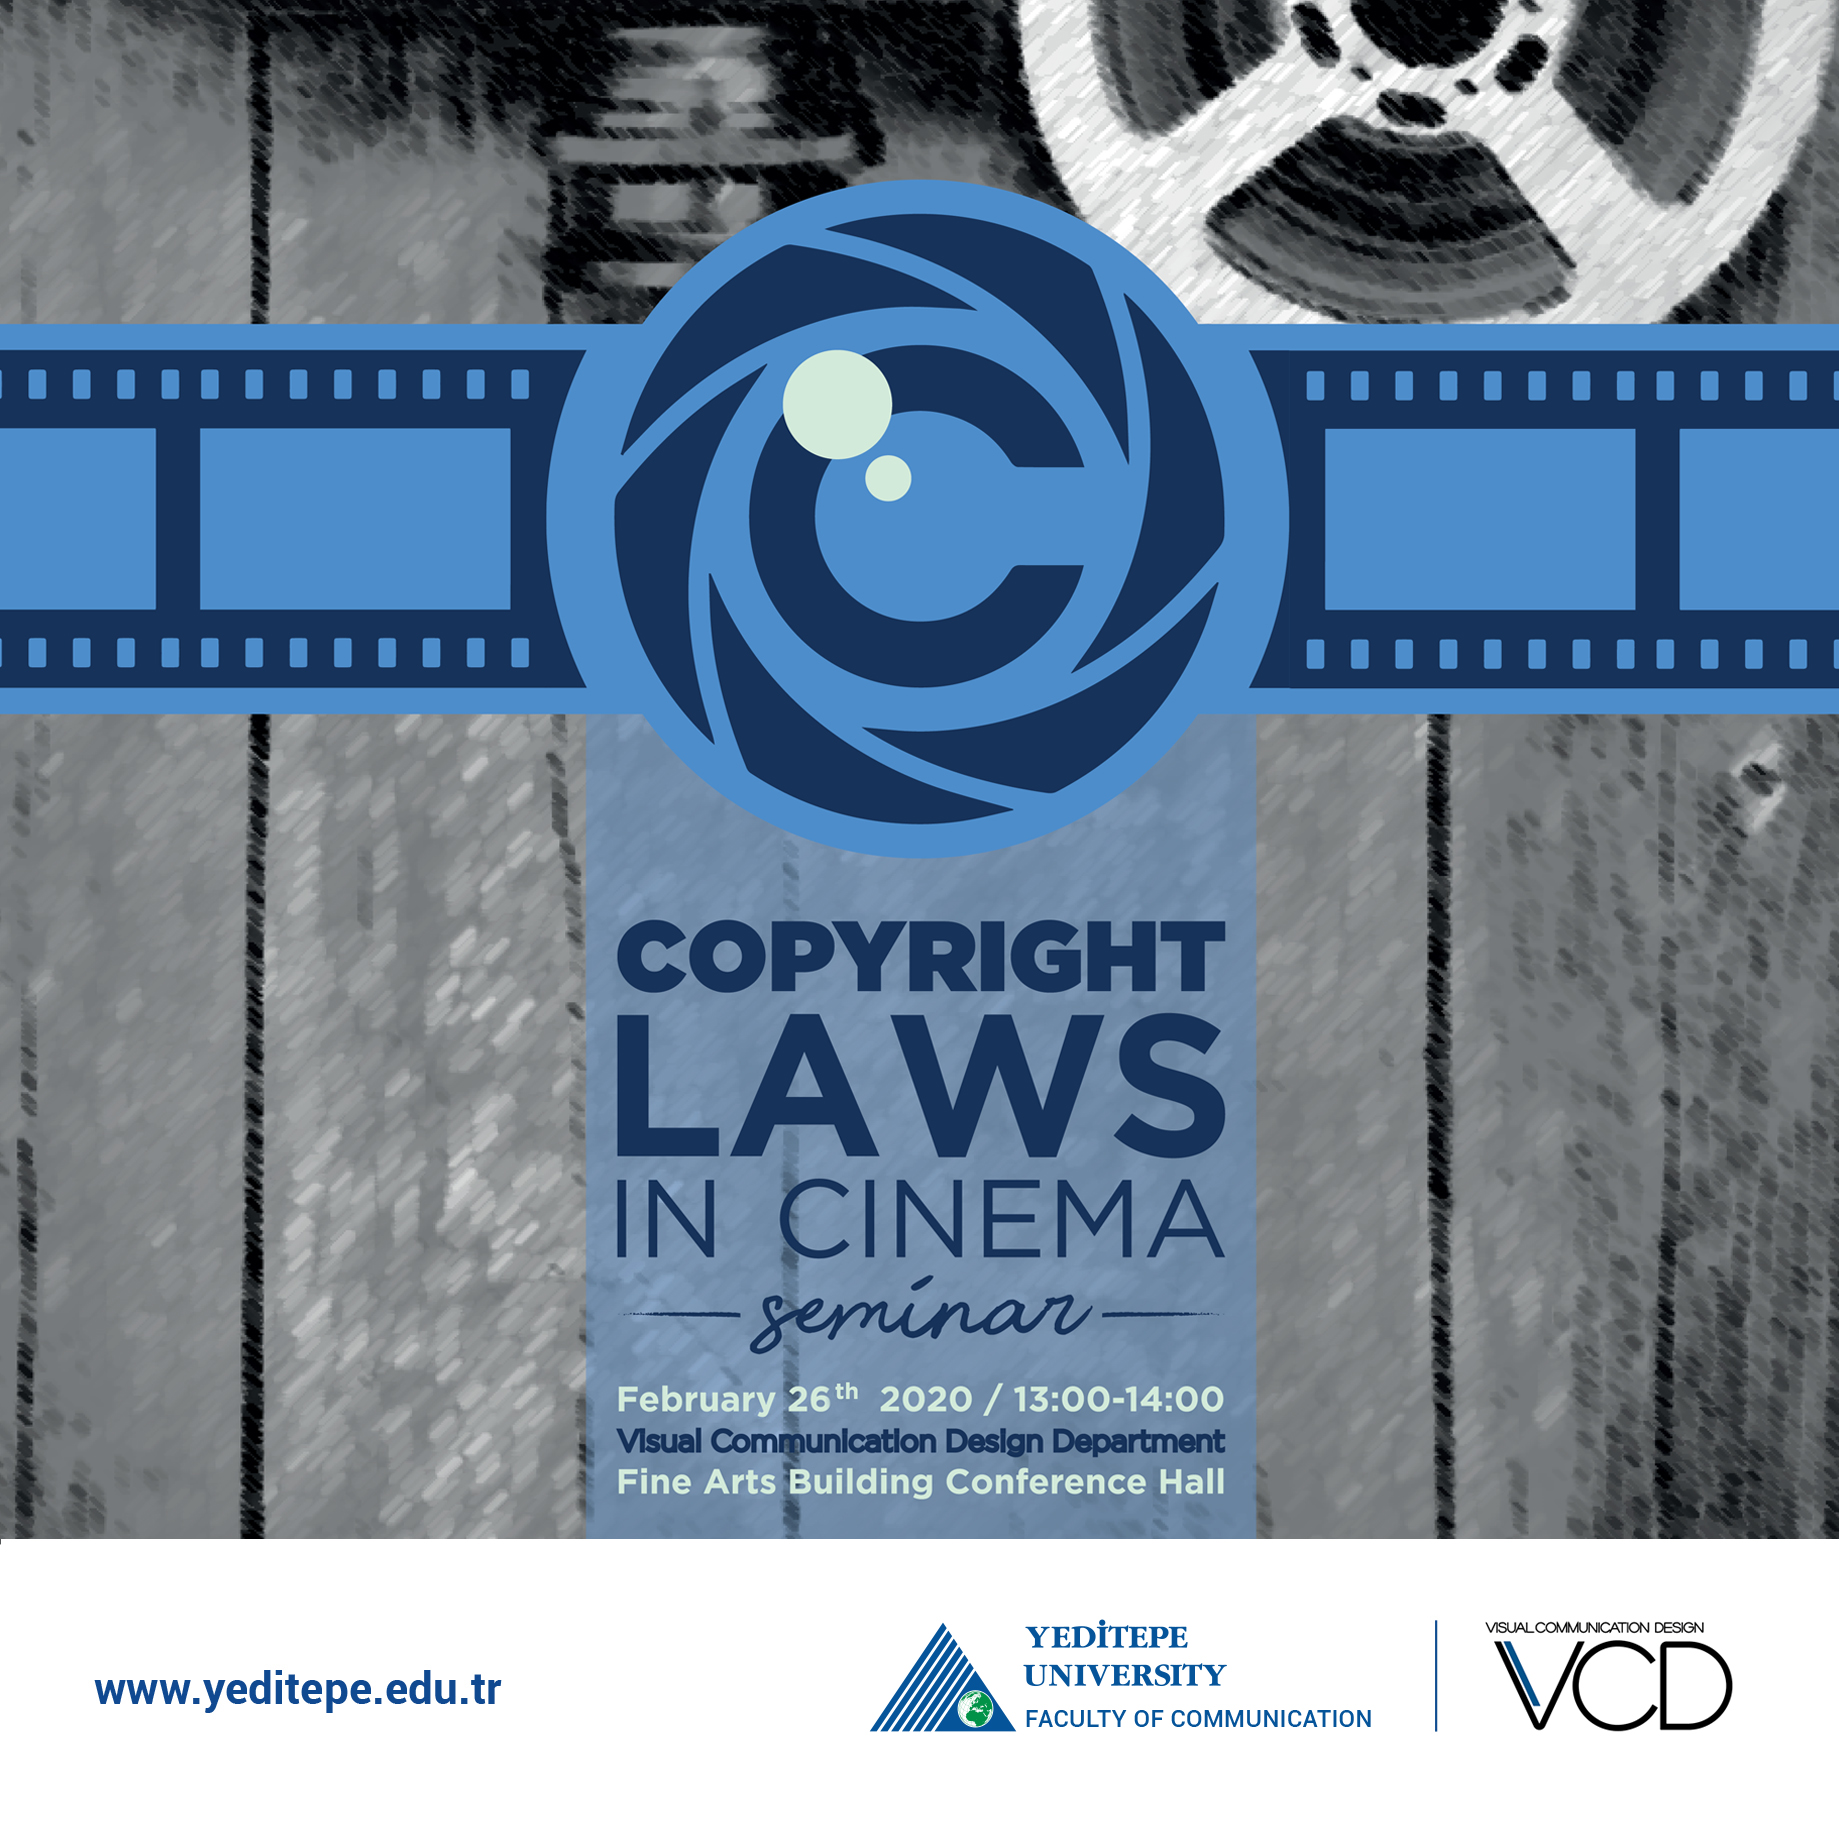 Copyrights Laws in Cinema